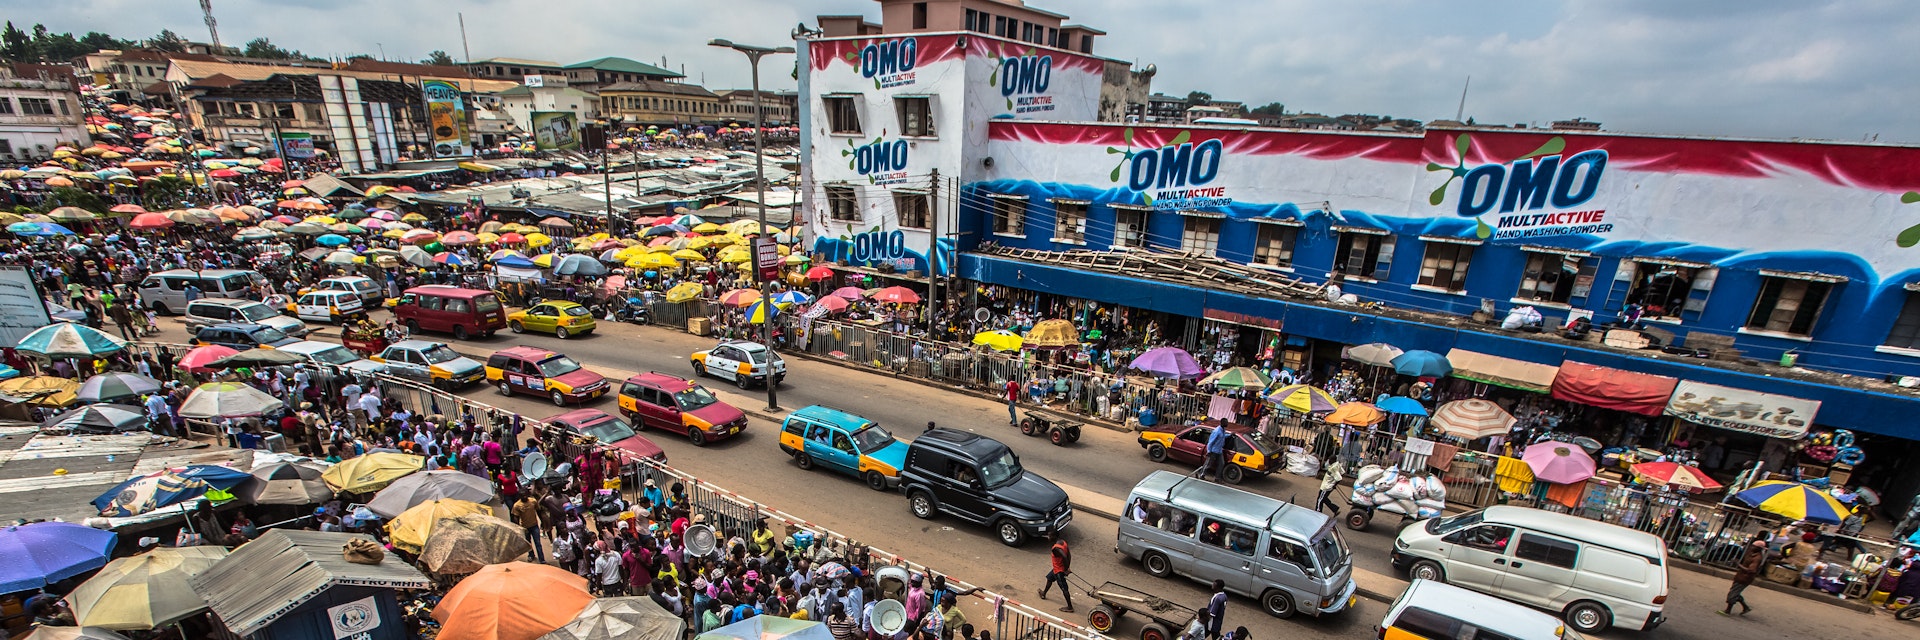 view of the kejetia market in kumasi, ghana, the biggest market in West African
160697002